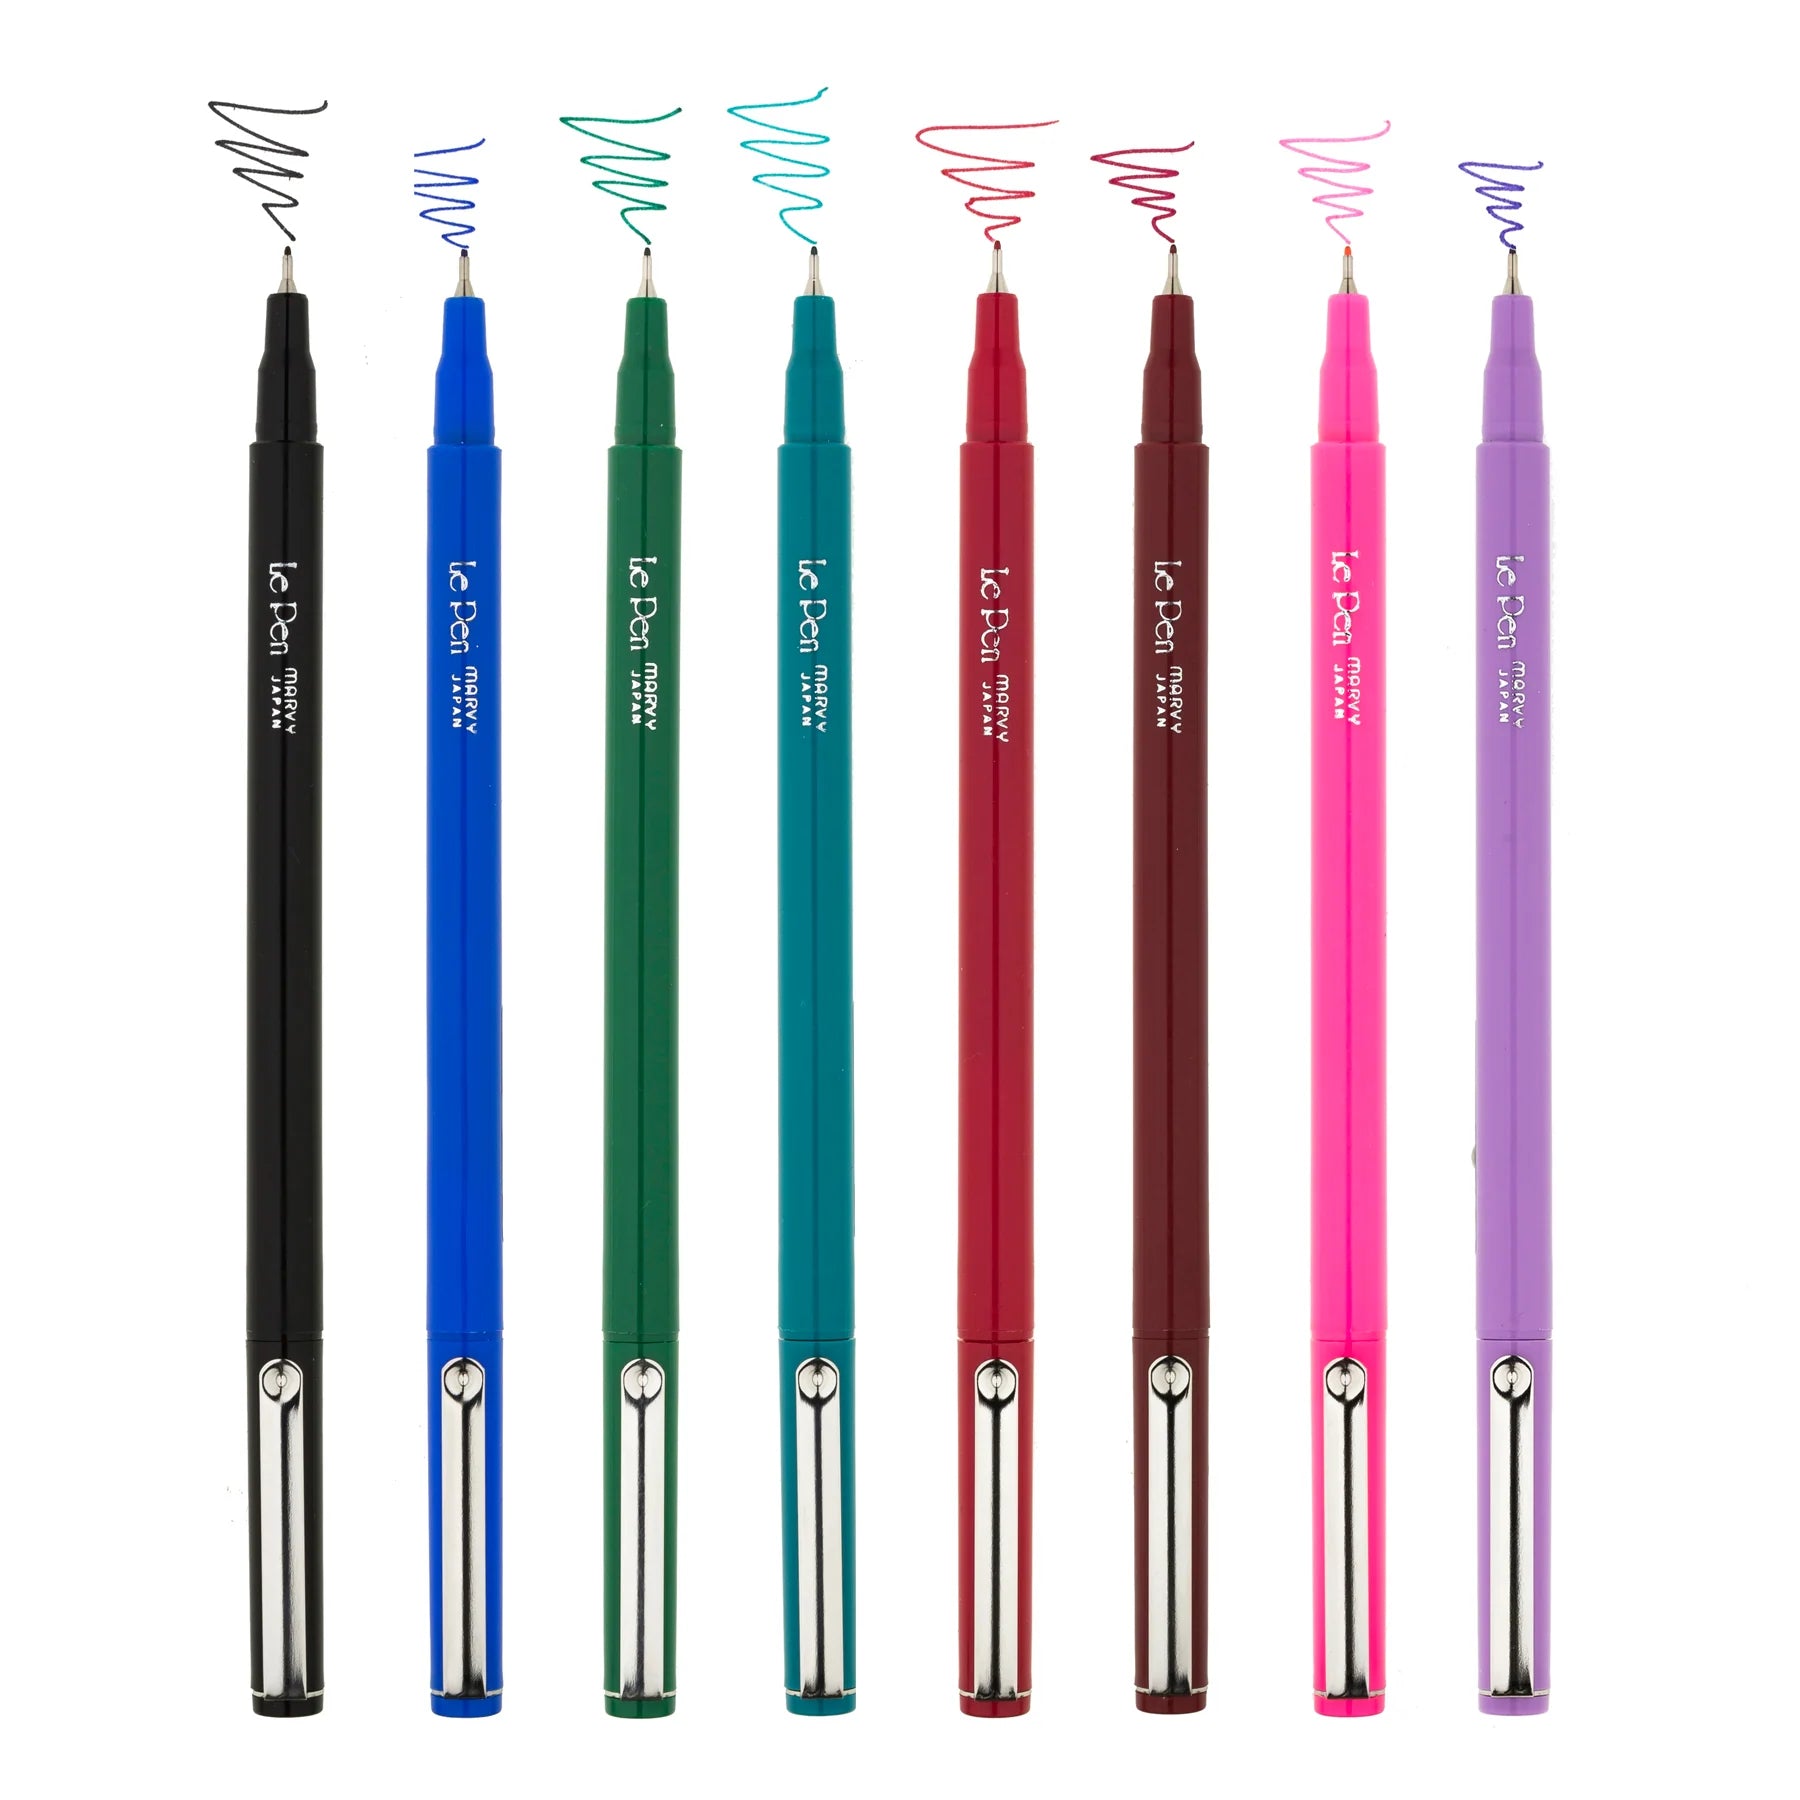 Le Pen fine tip colored pens -- black, blue, dark green, turquoise, red, burgundy, pink and lavender 